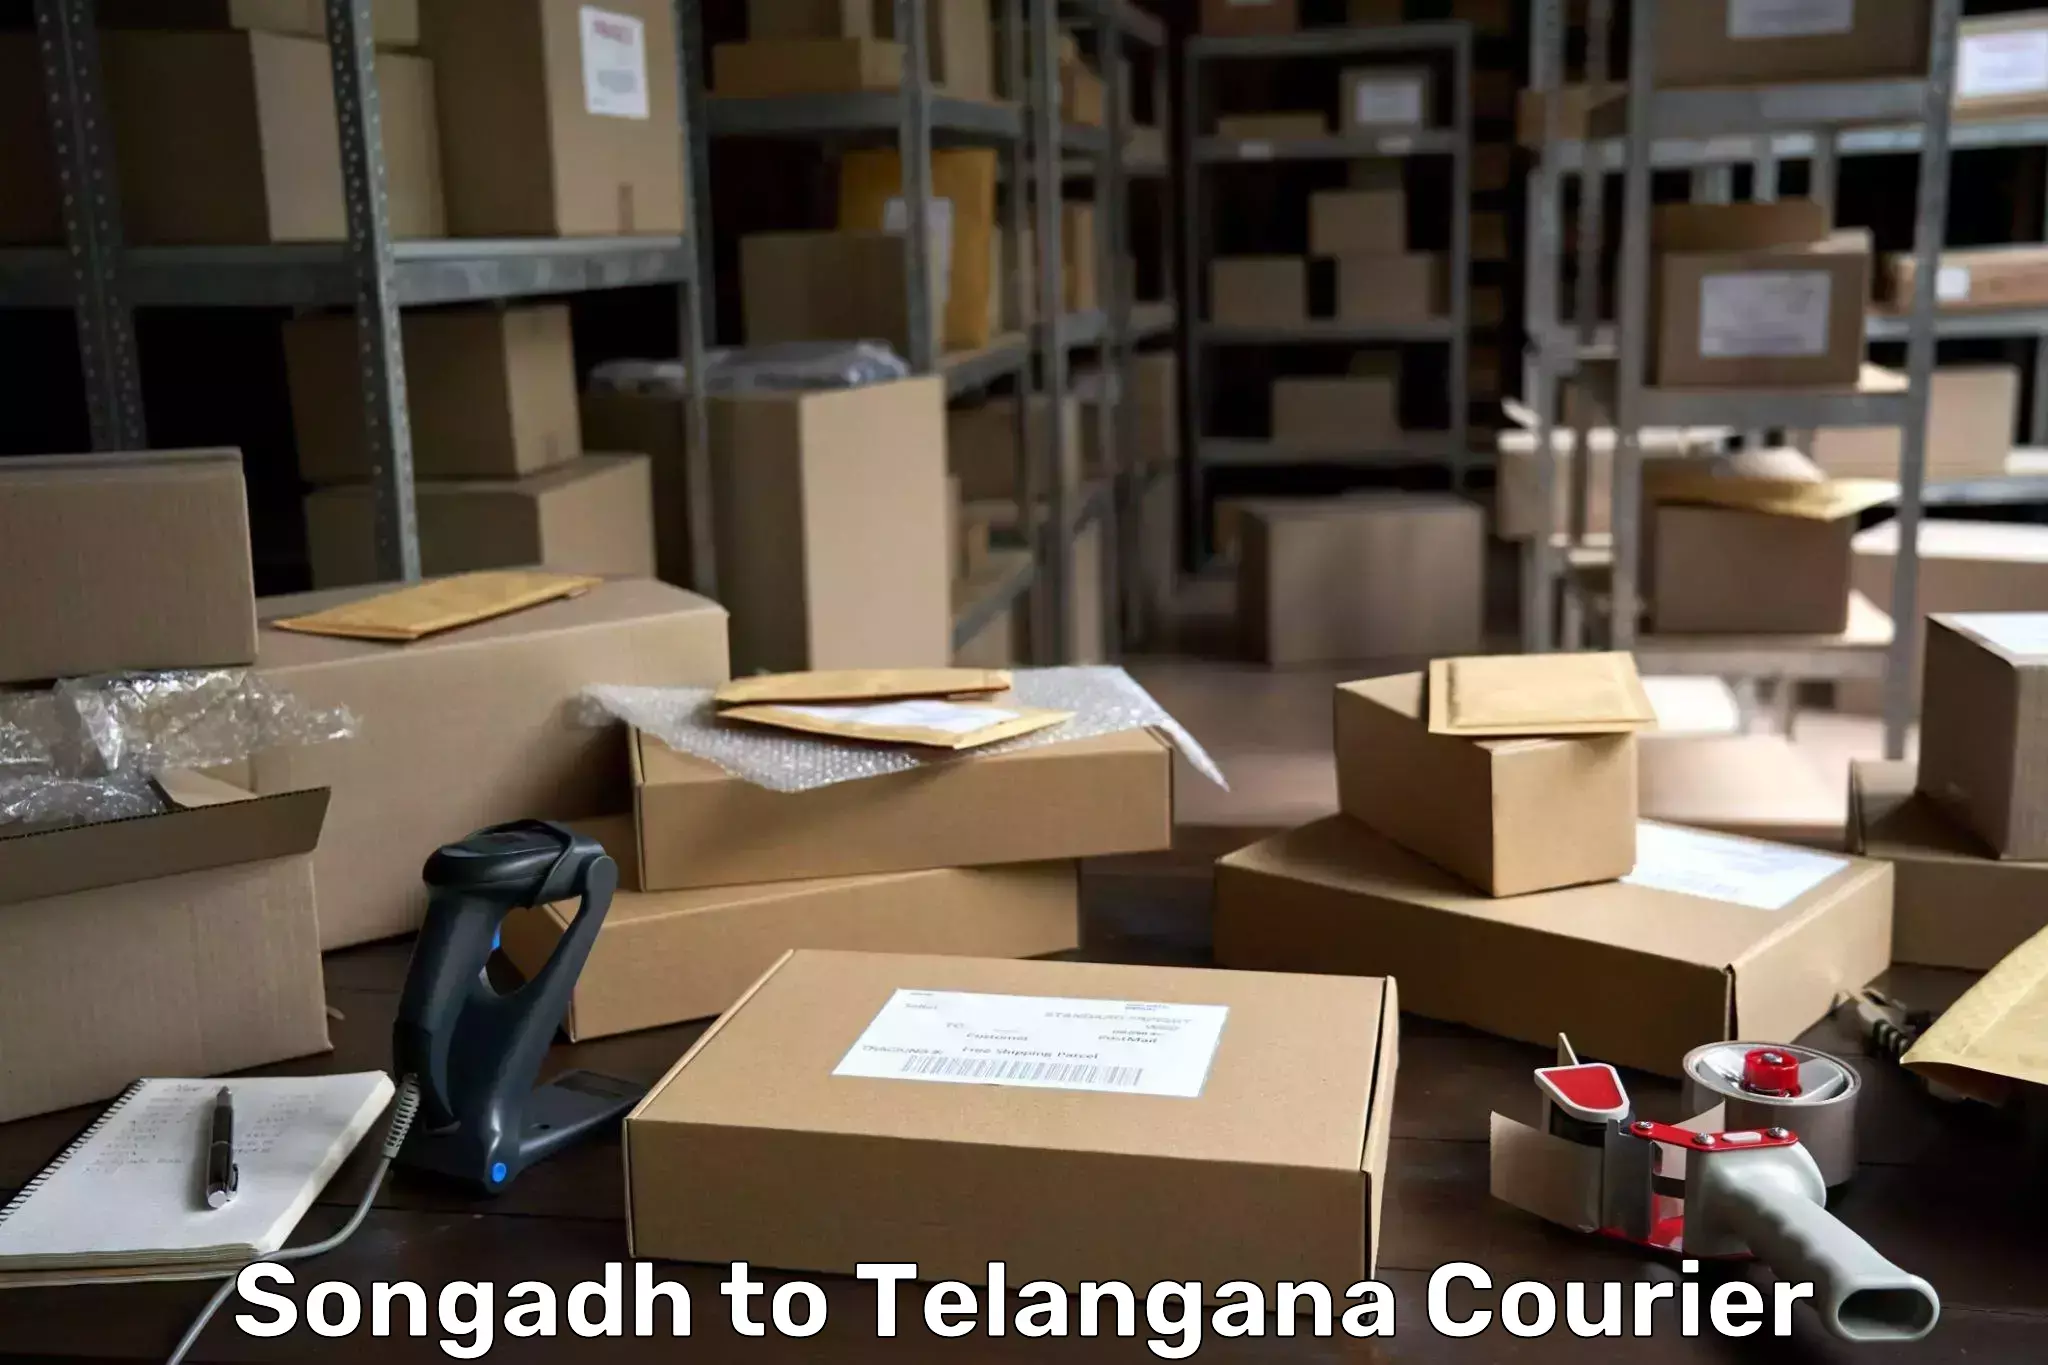 Efficient parcel service Songadh to Manneguda